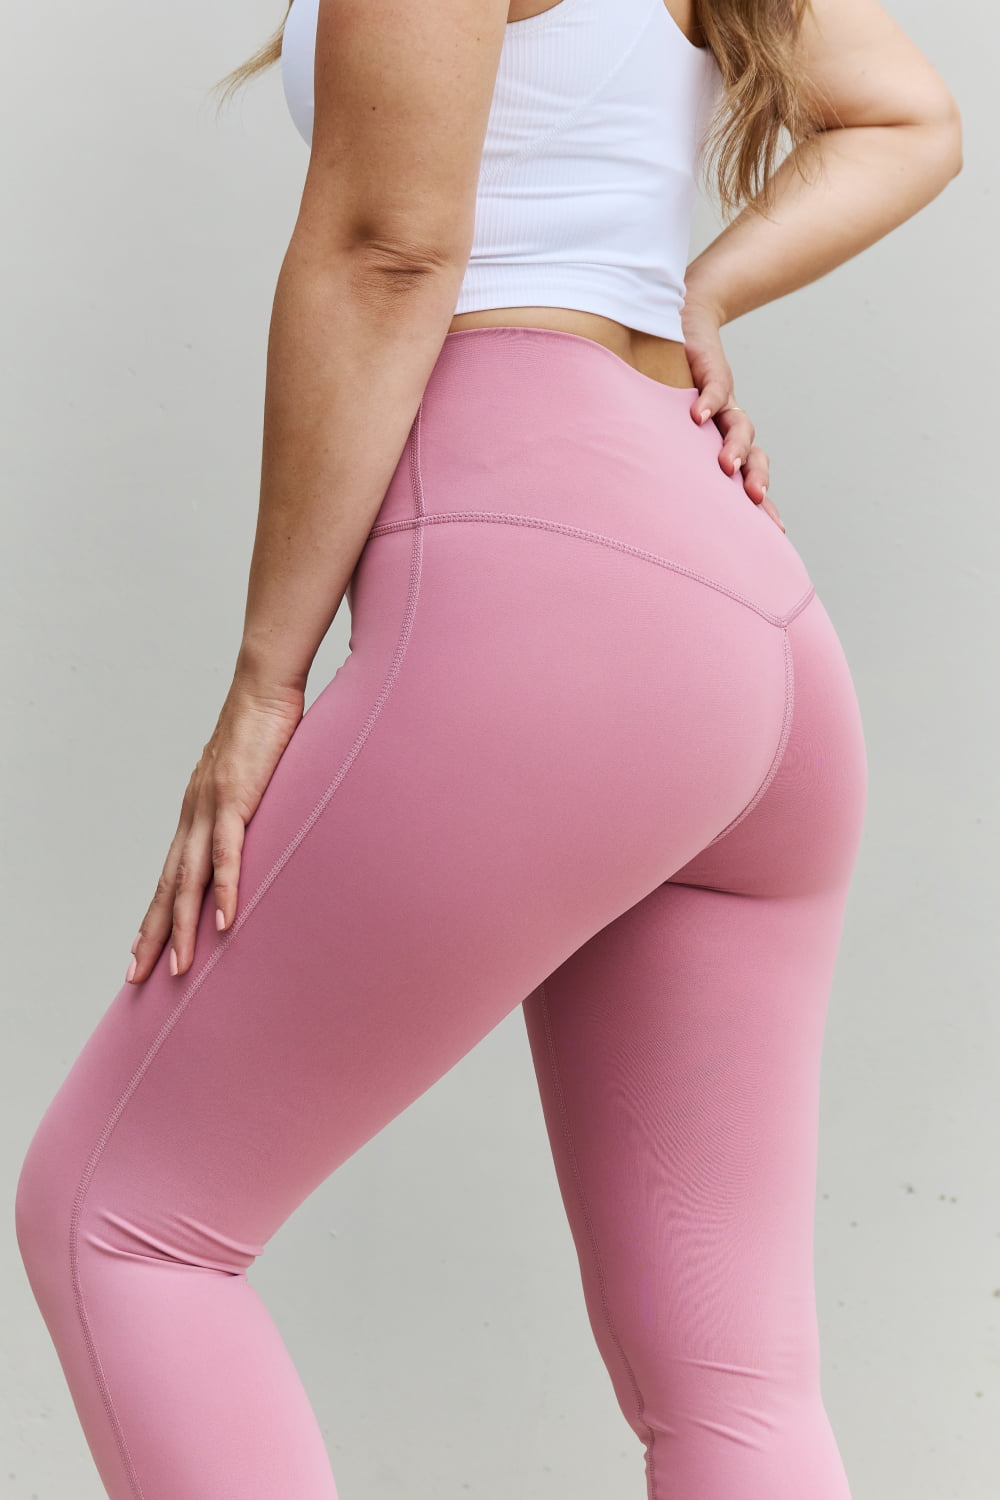 Fit For You Full Size High Waist Active Leggings in Light Rose - Women’s Clothing & Accessories - Activewear - 6 - 2024